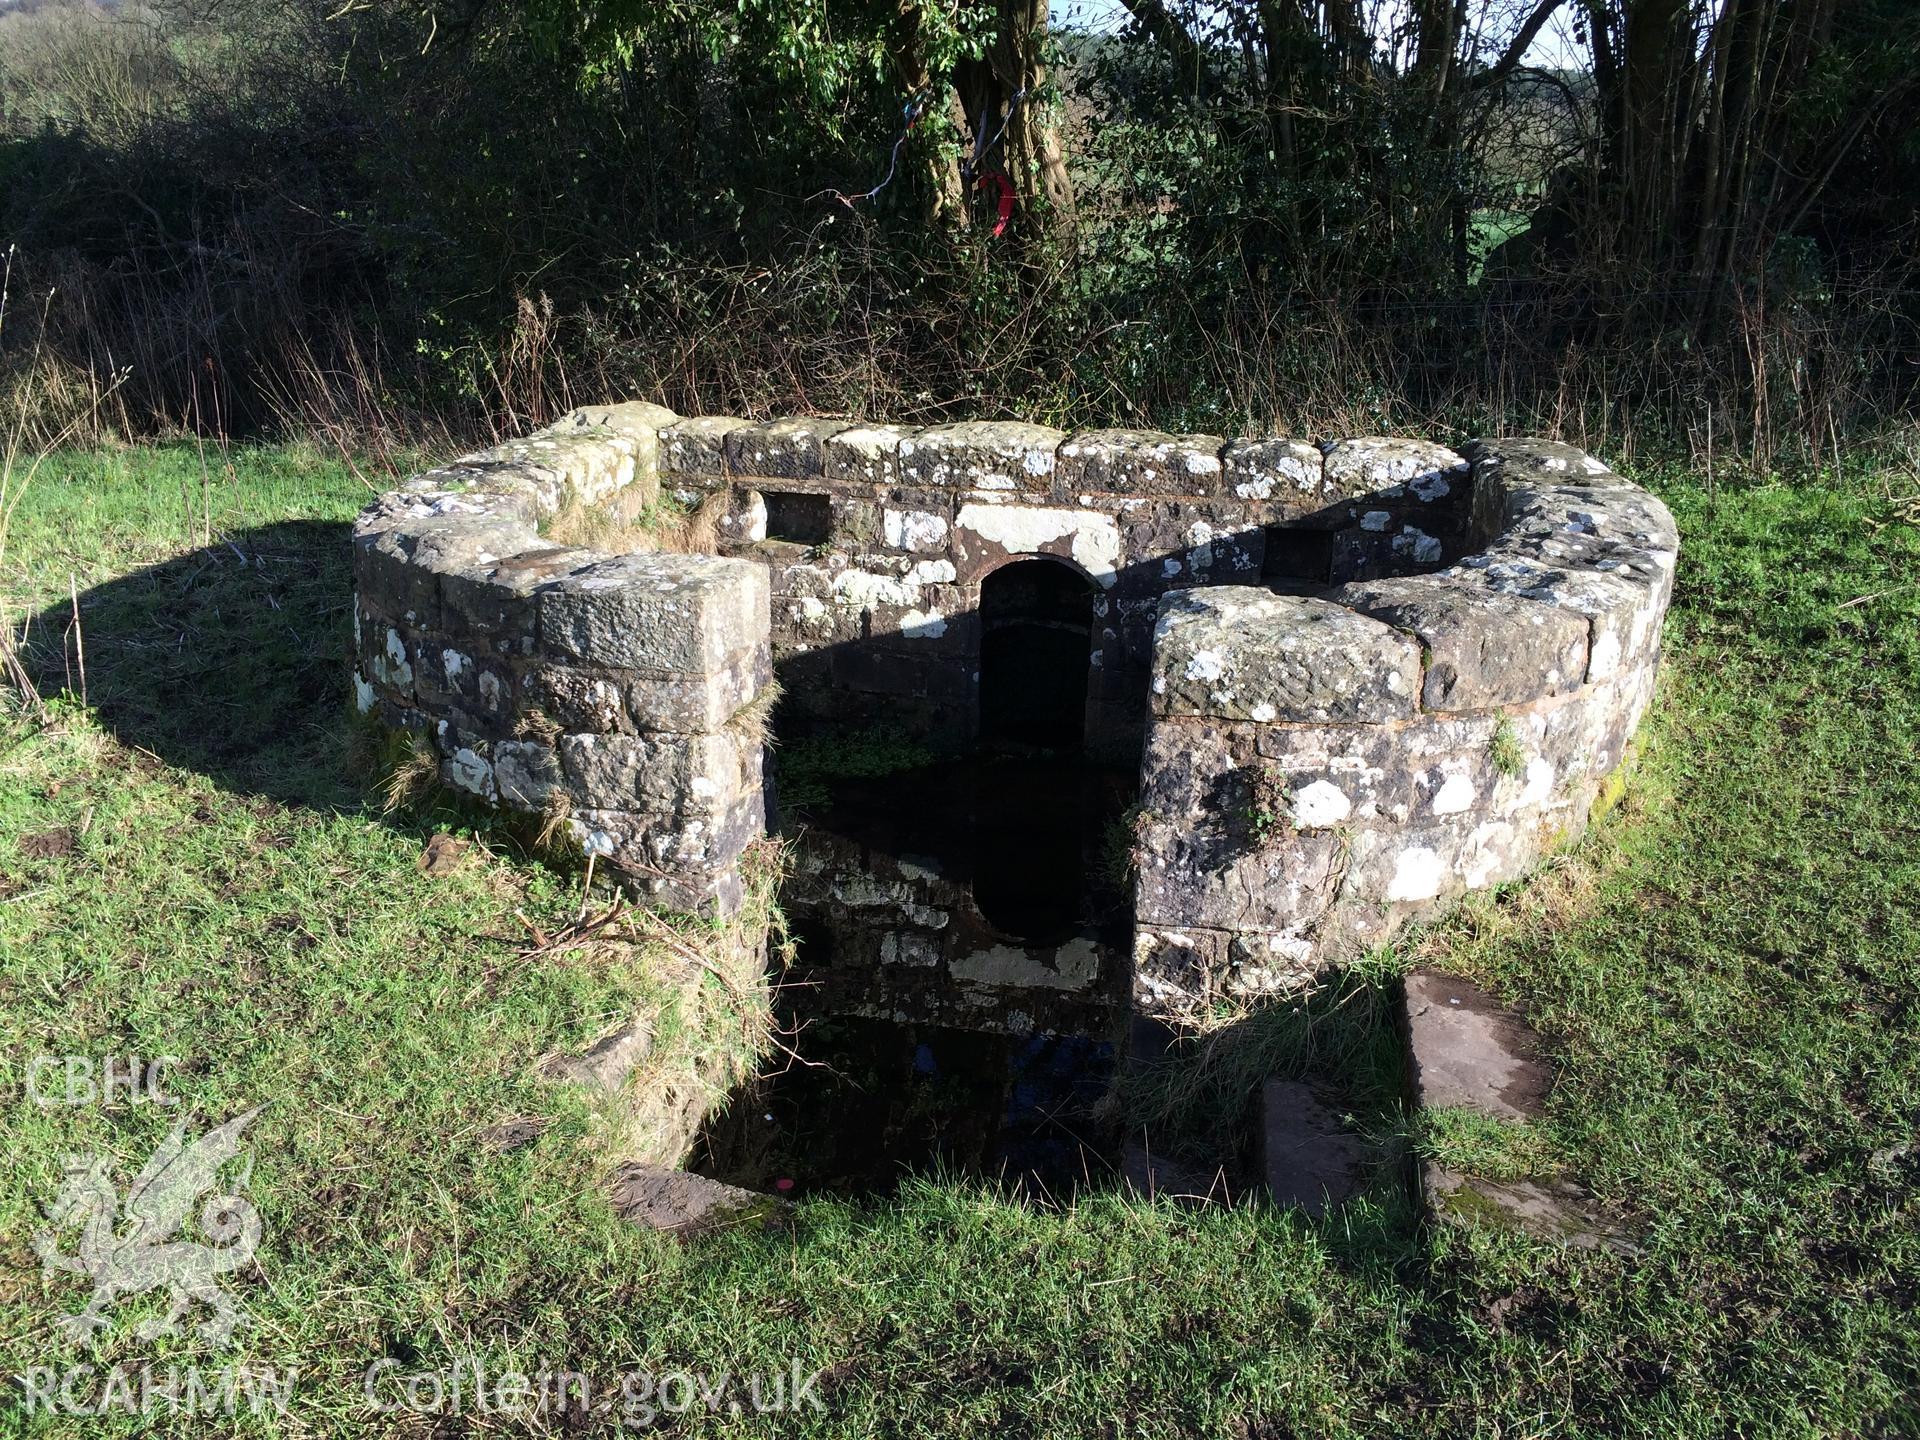 Colour photo showing St Anne's Well, taken by Paul R. Davis, 10th February 2016.